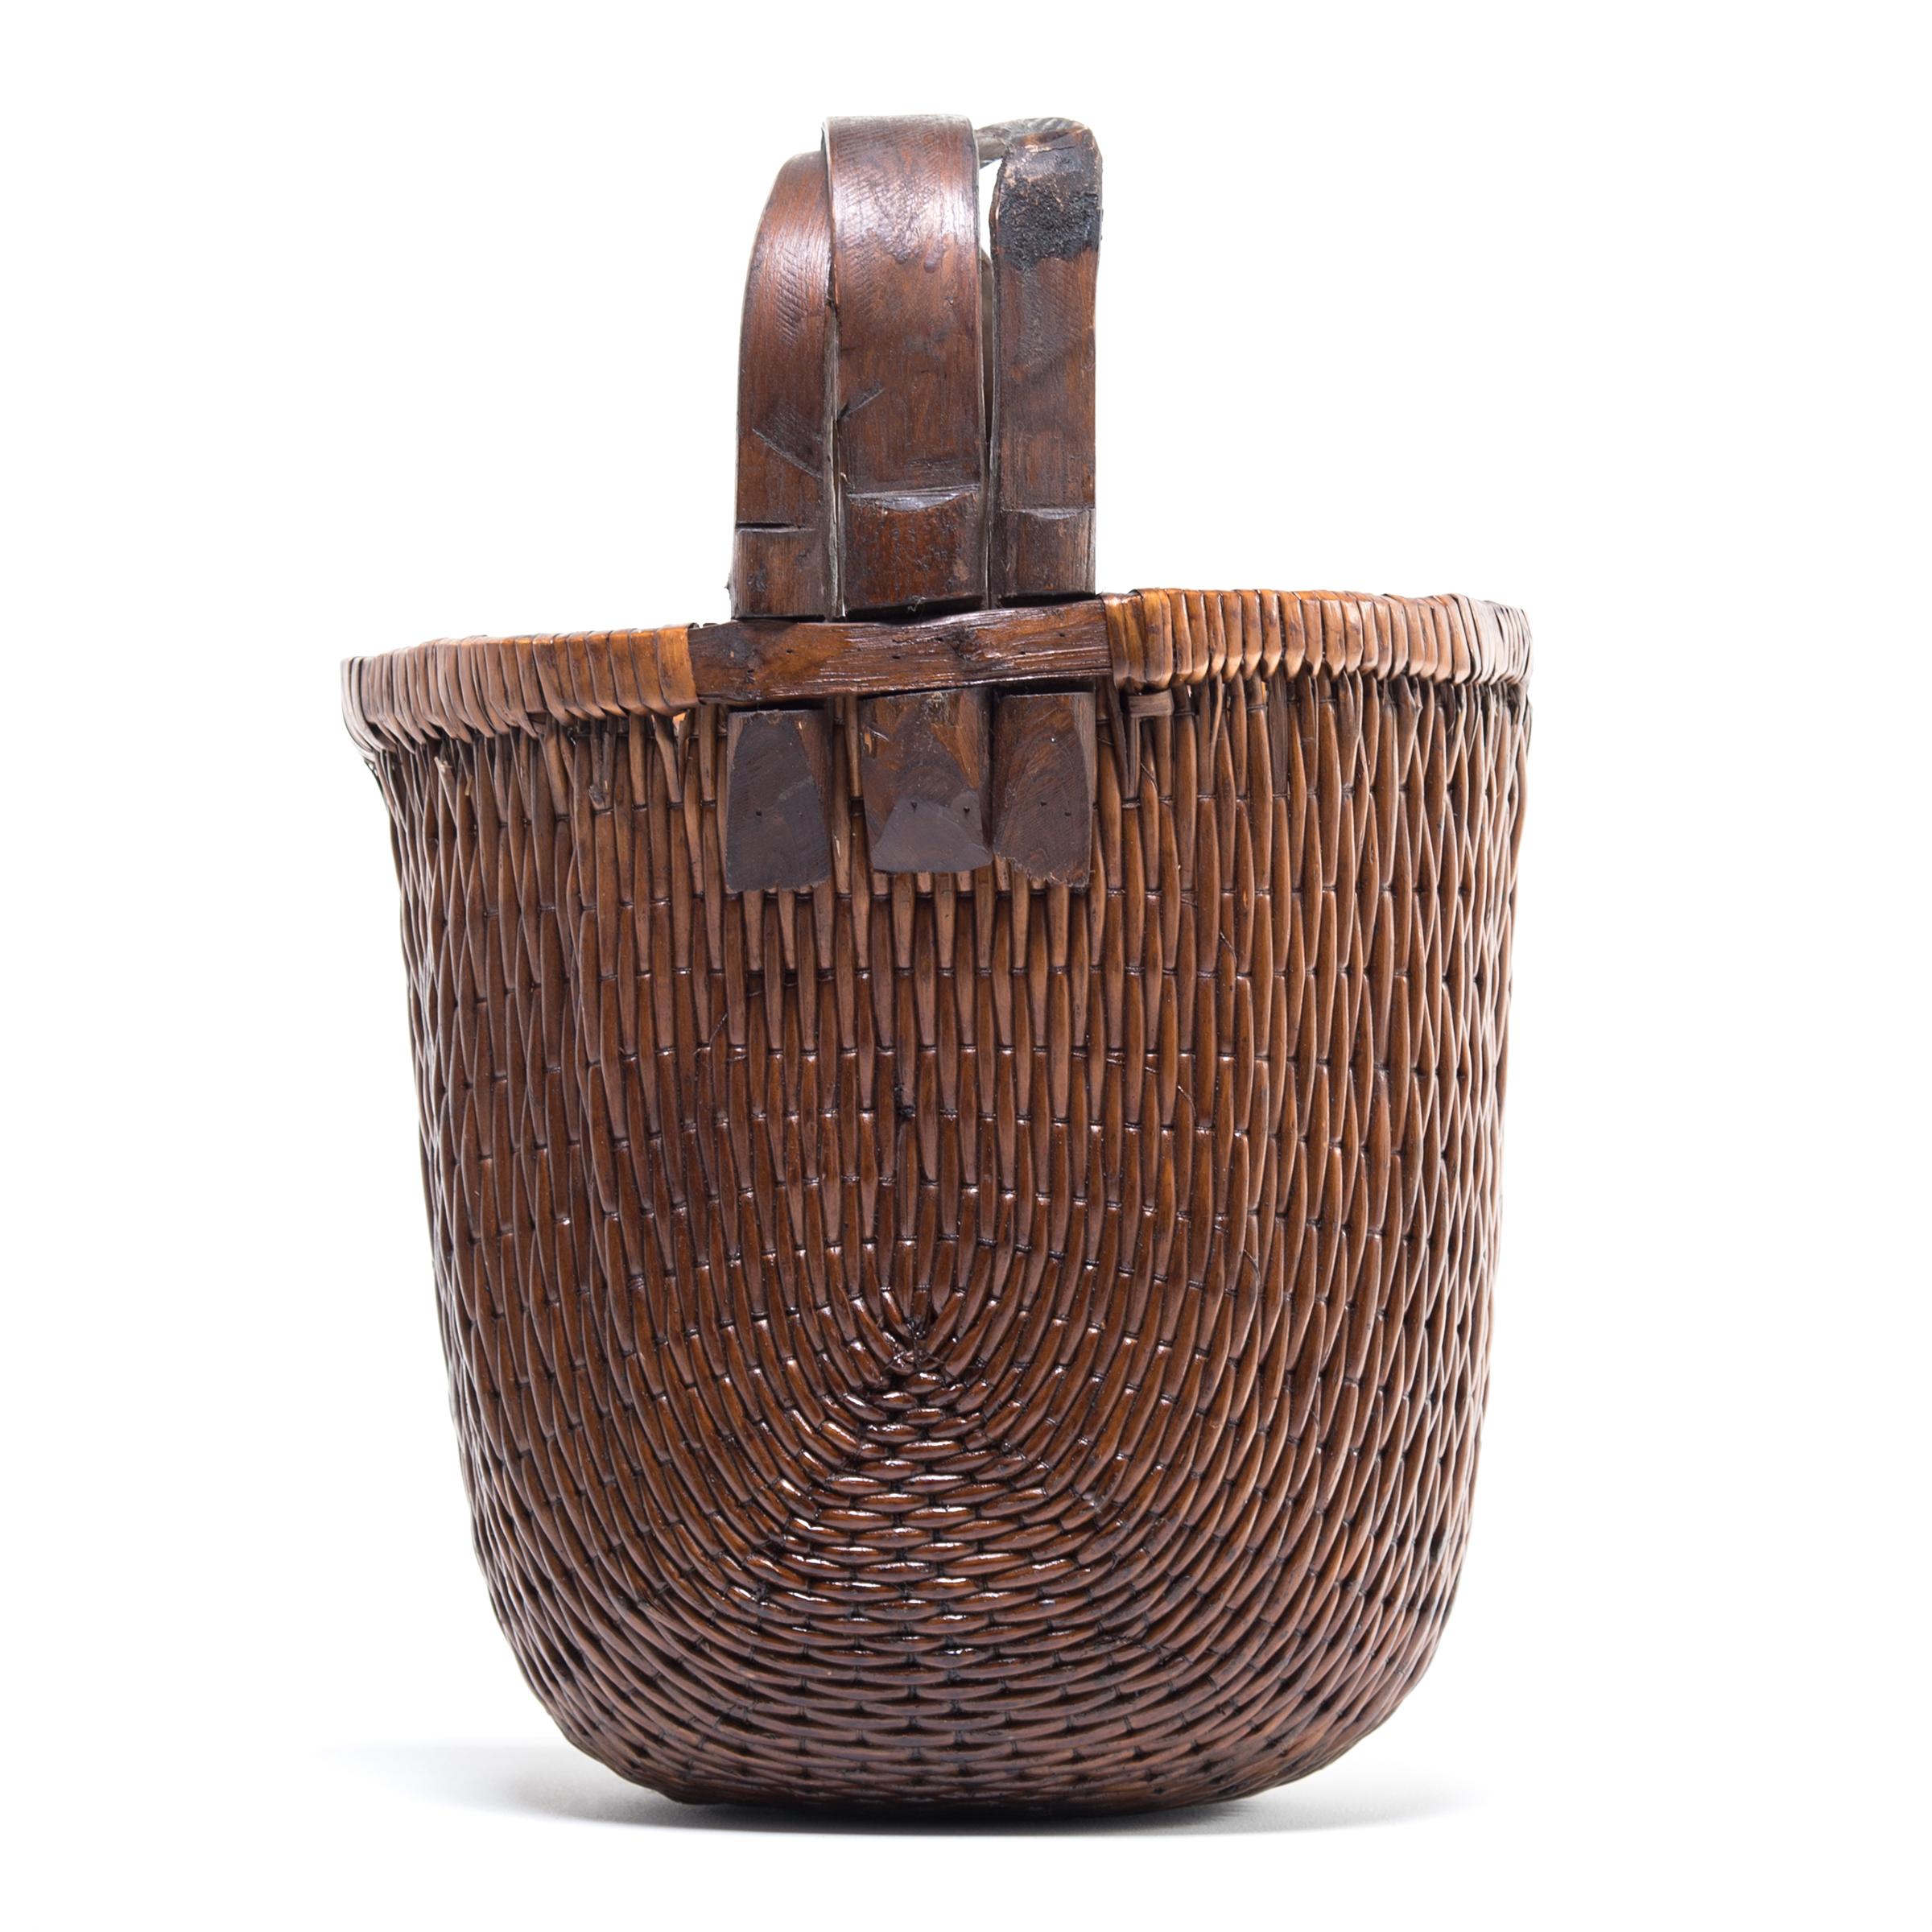 Long ago, someone may have carried this finely crafted bent handle willow basket home from the market everyday: the tightly woven willow strips and strong handle comfortably supporting the weight of their groceries. This basket was made in China and